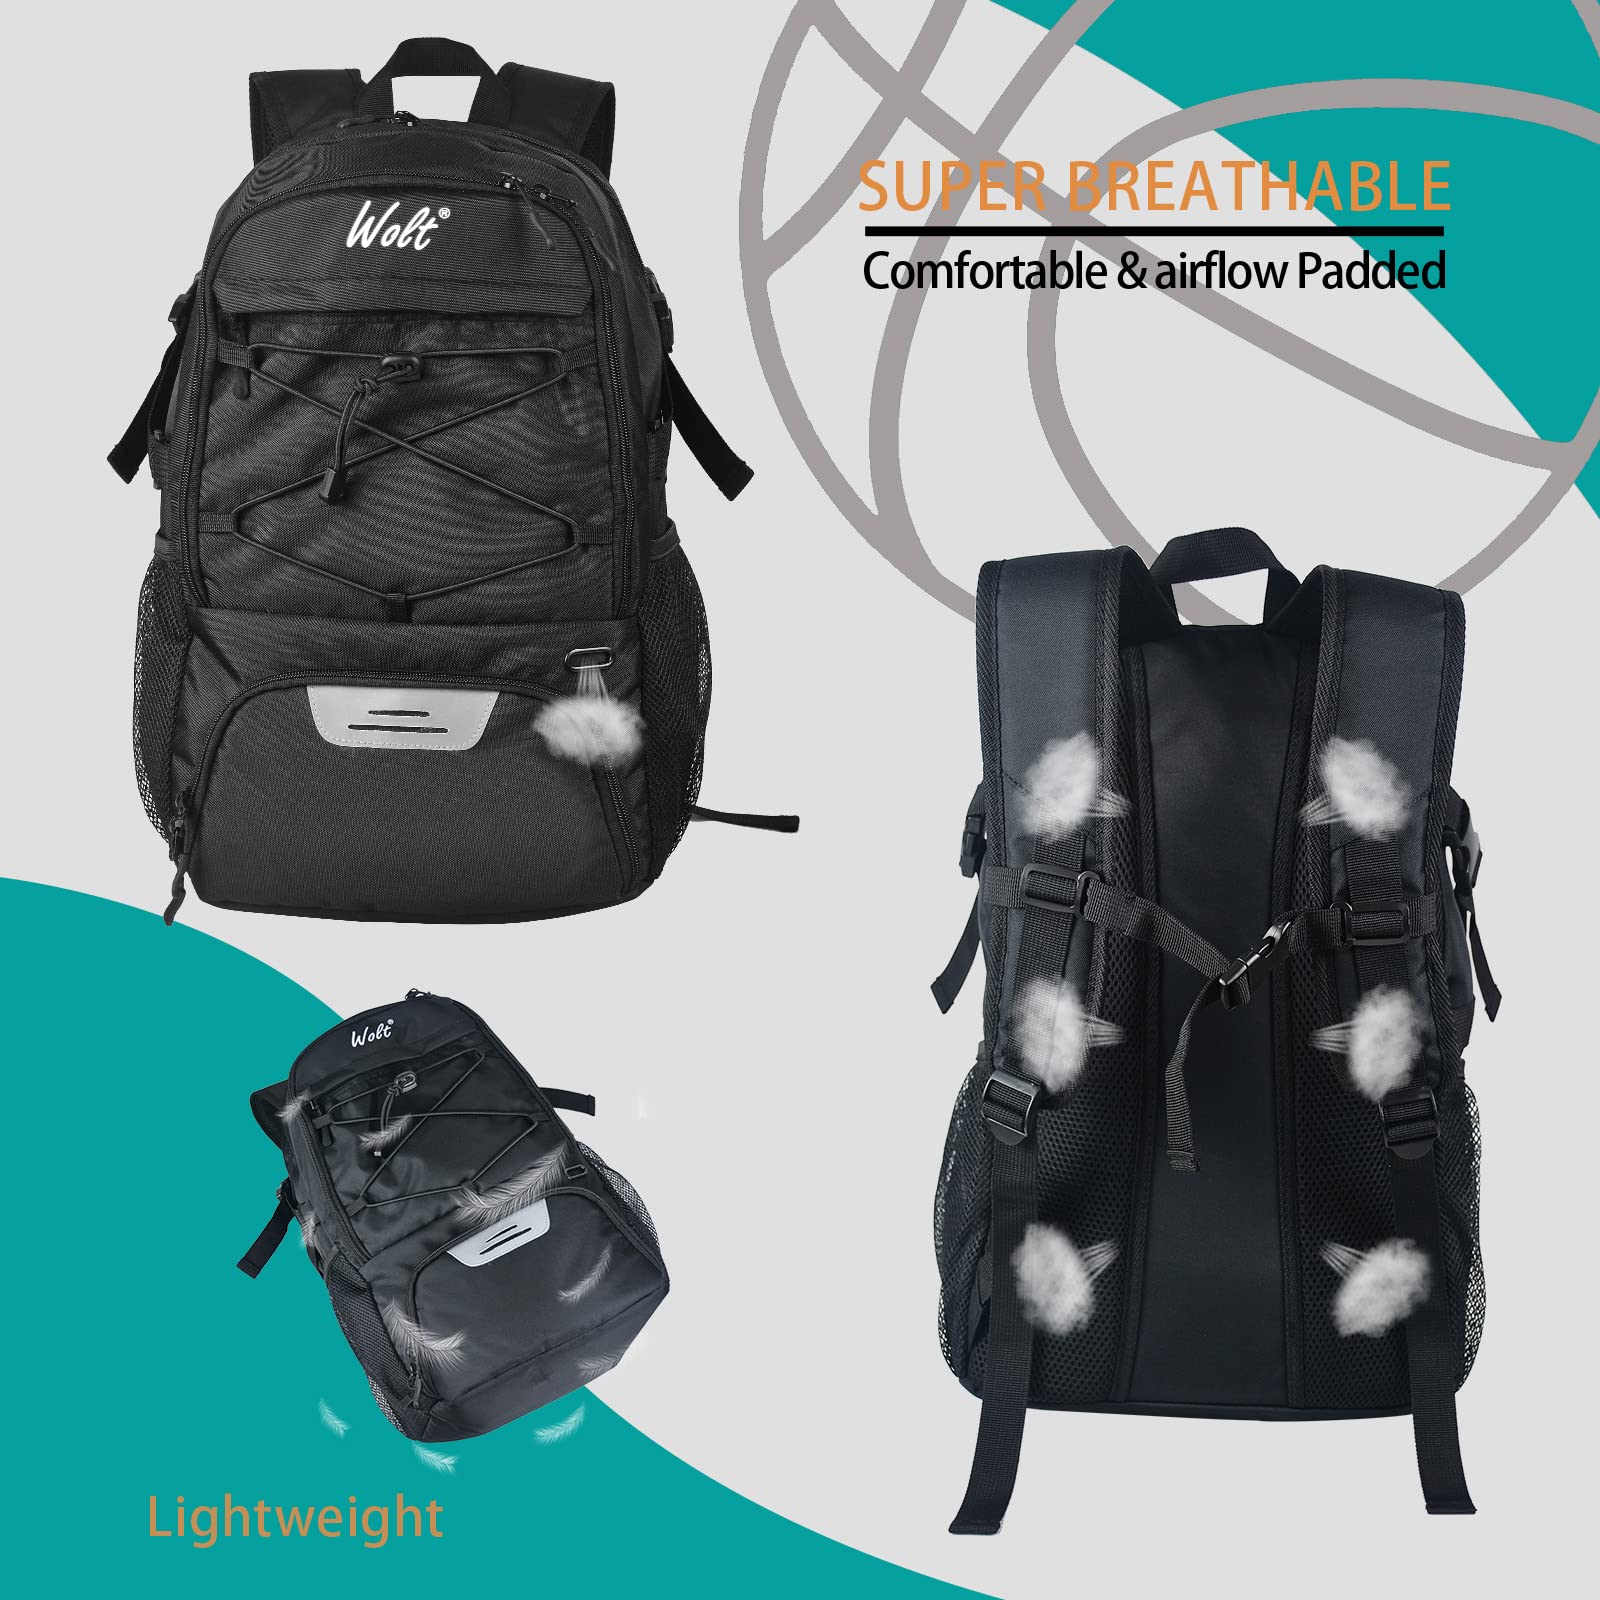 WOLT | Basketball Backpack Large Sports Bag with Separate Ball holder & Shoes compartment, Best for Basketball, Soccer, Volleyball, Swim, Gym, Travel